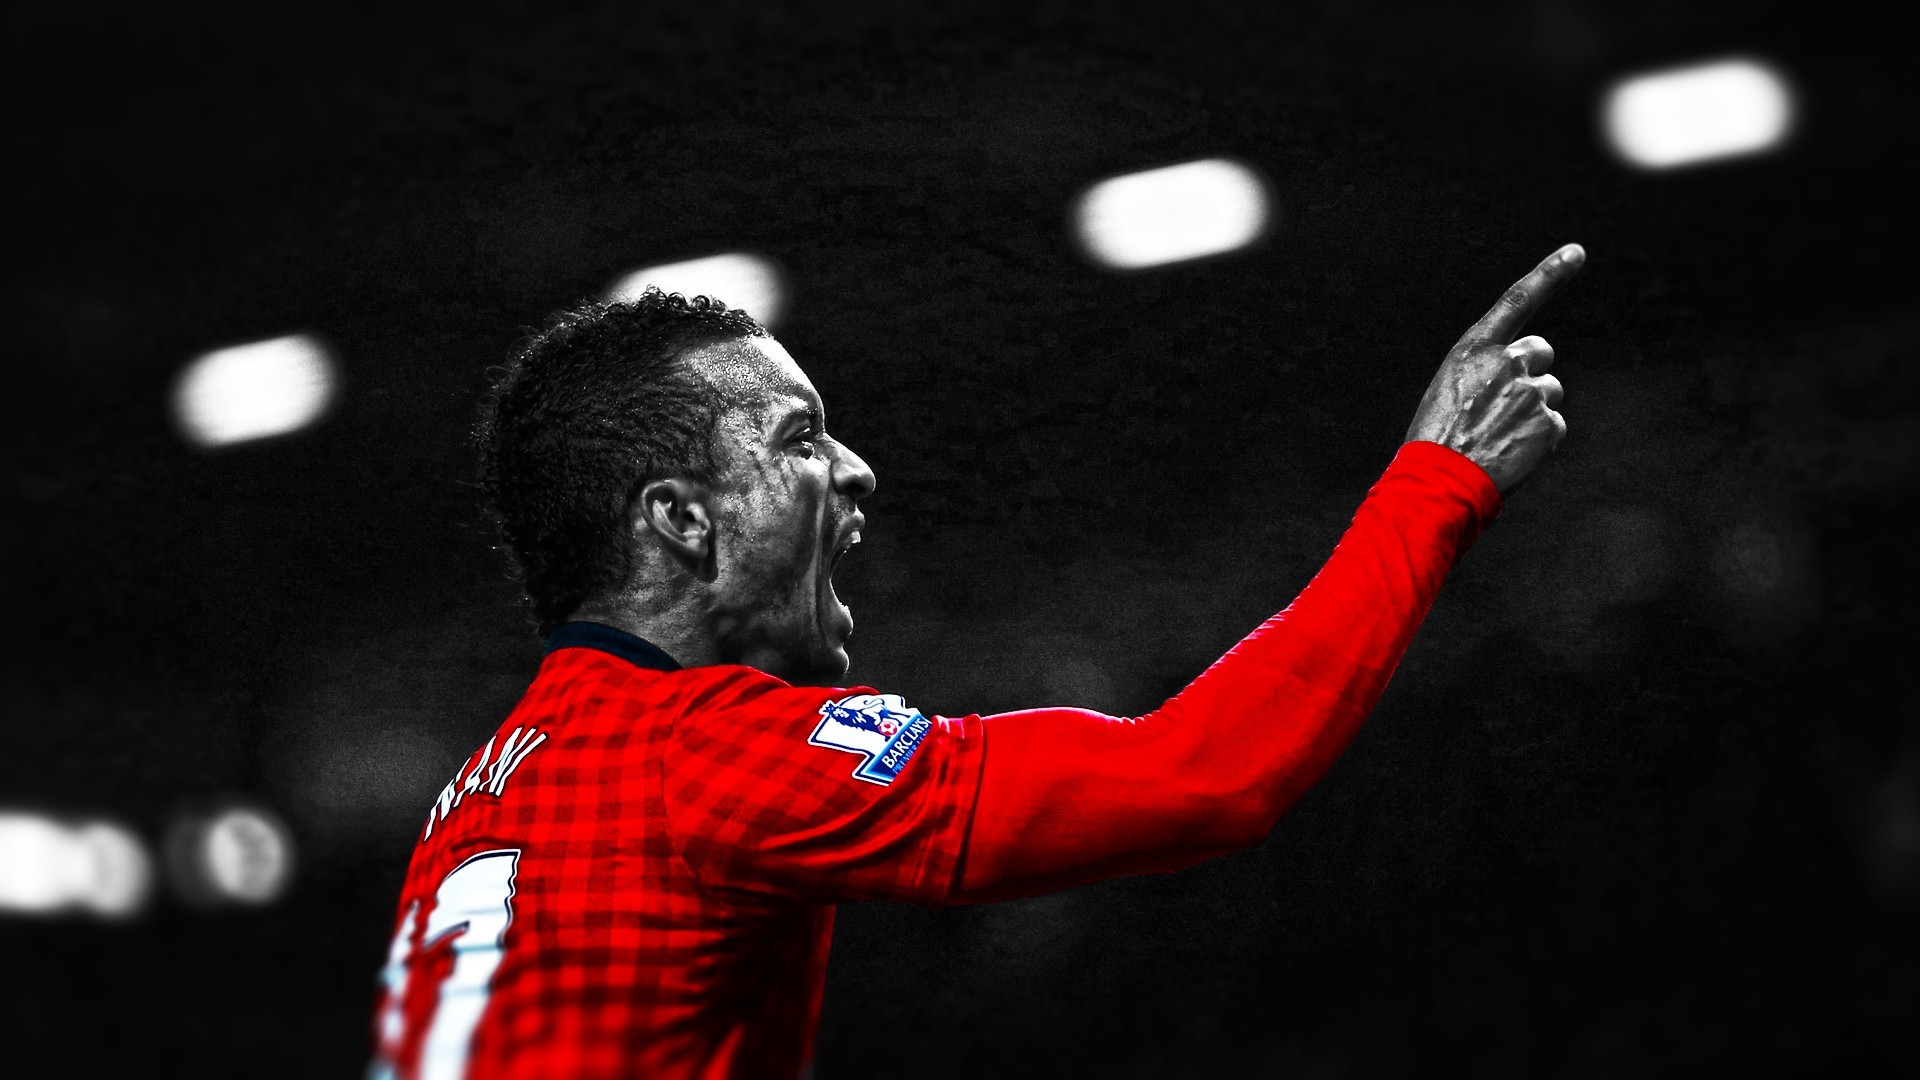 1920x1080 Manchester-United-Wallpapers-Full-HD-Free-Download-Wallpaperxyz.